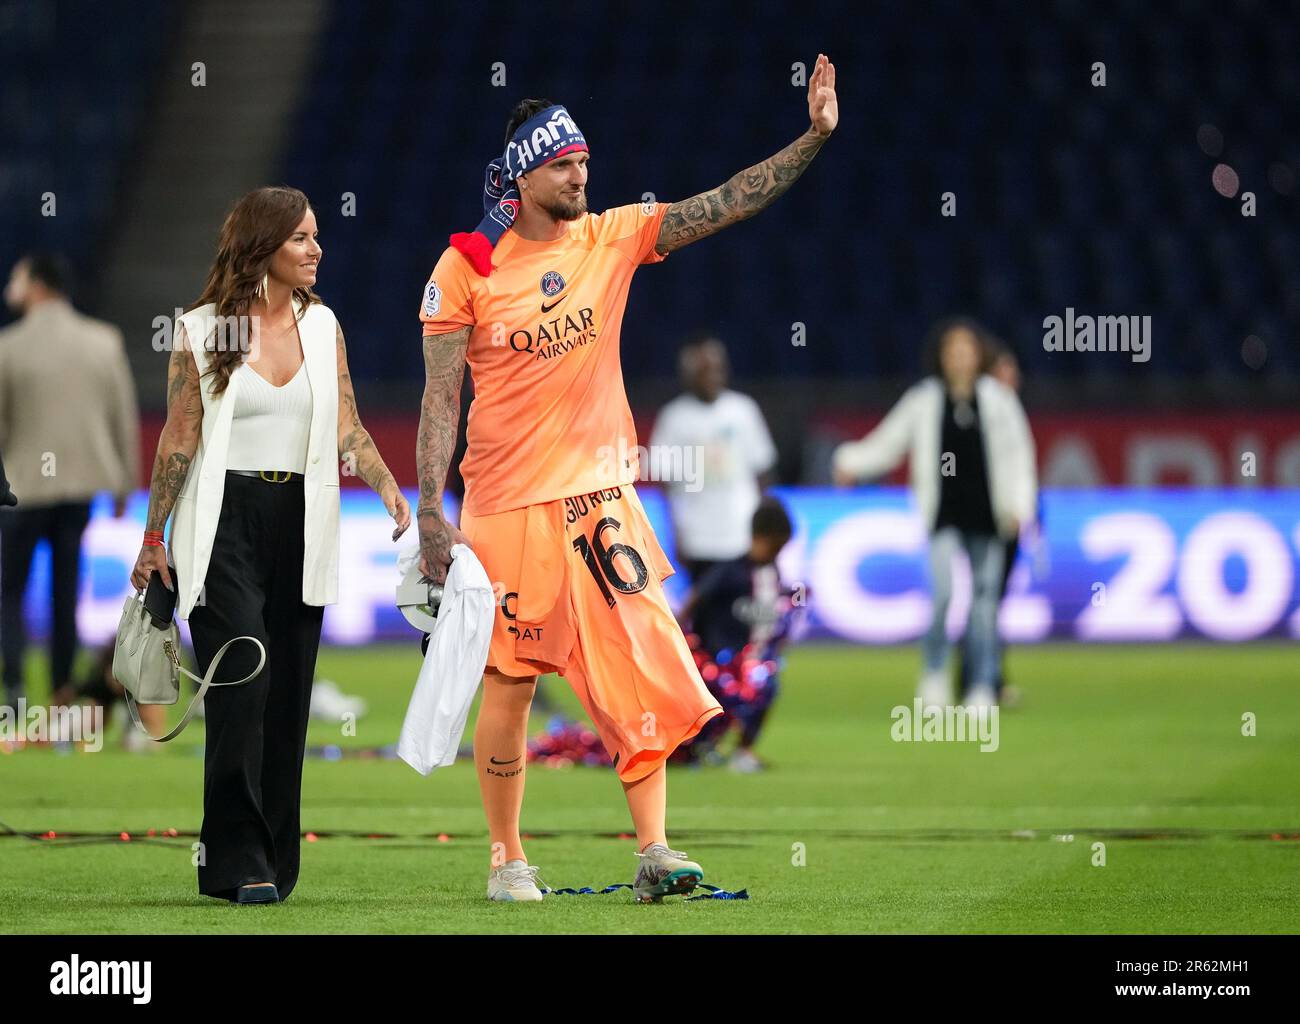 Goalkeeper Alexandre Letellier of PSG with wife Chloe Letellier post match  during the Ligue 1 match between Paris Saint Germain and Clermont Foot at P  Stock Photo - Alamy